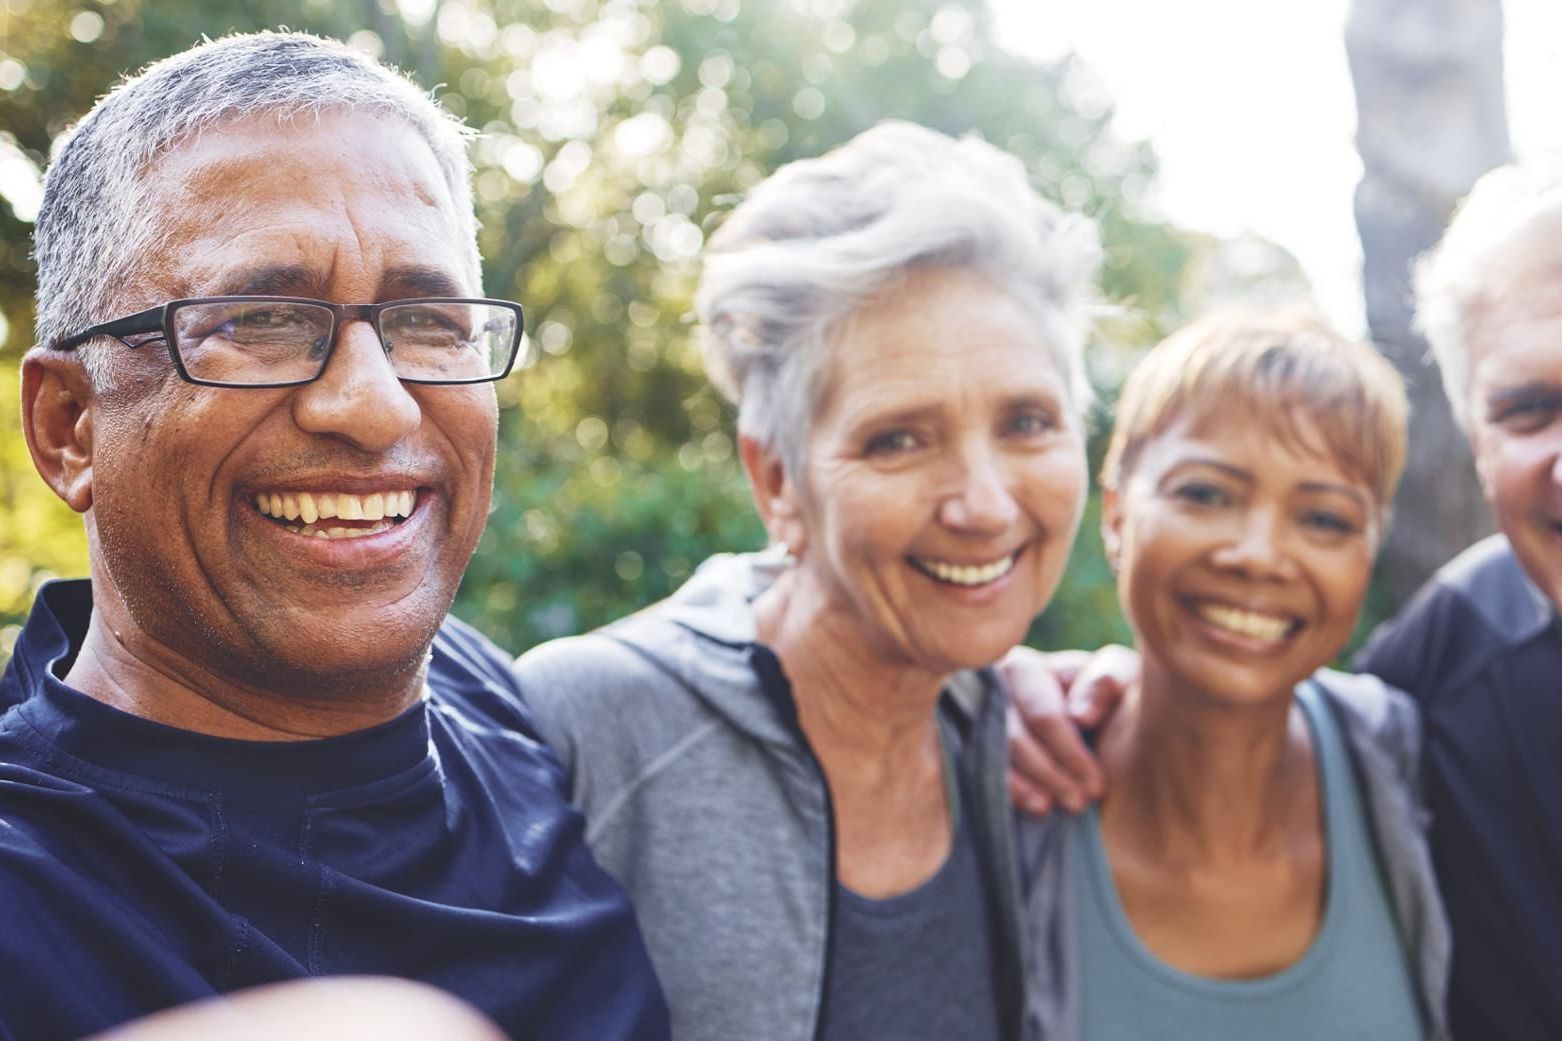 Group of diverse aging adults smiling with arms around each other's shoulders.